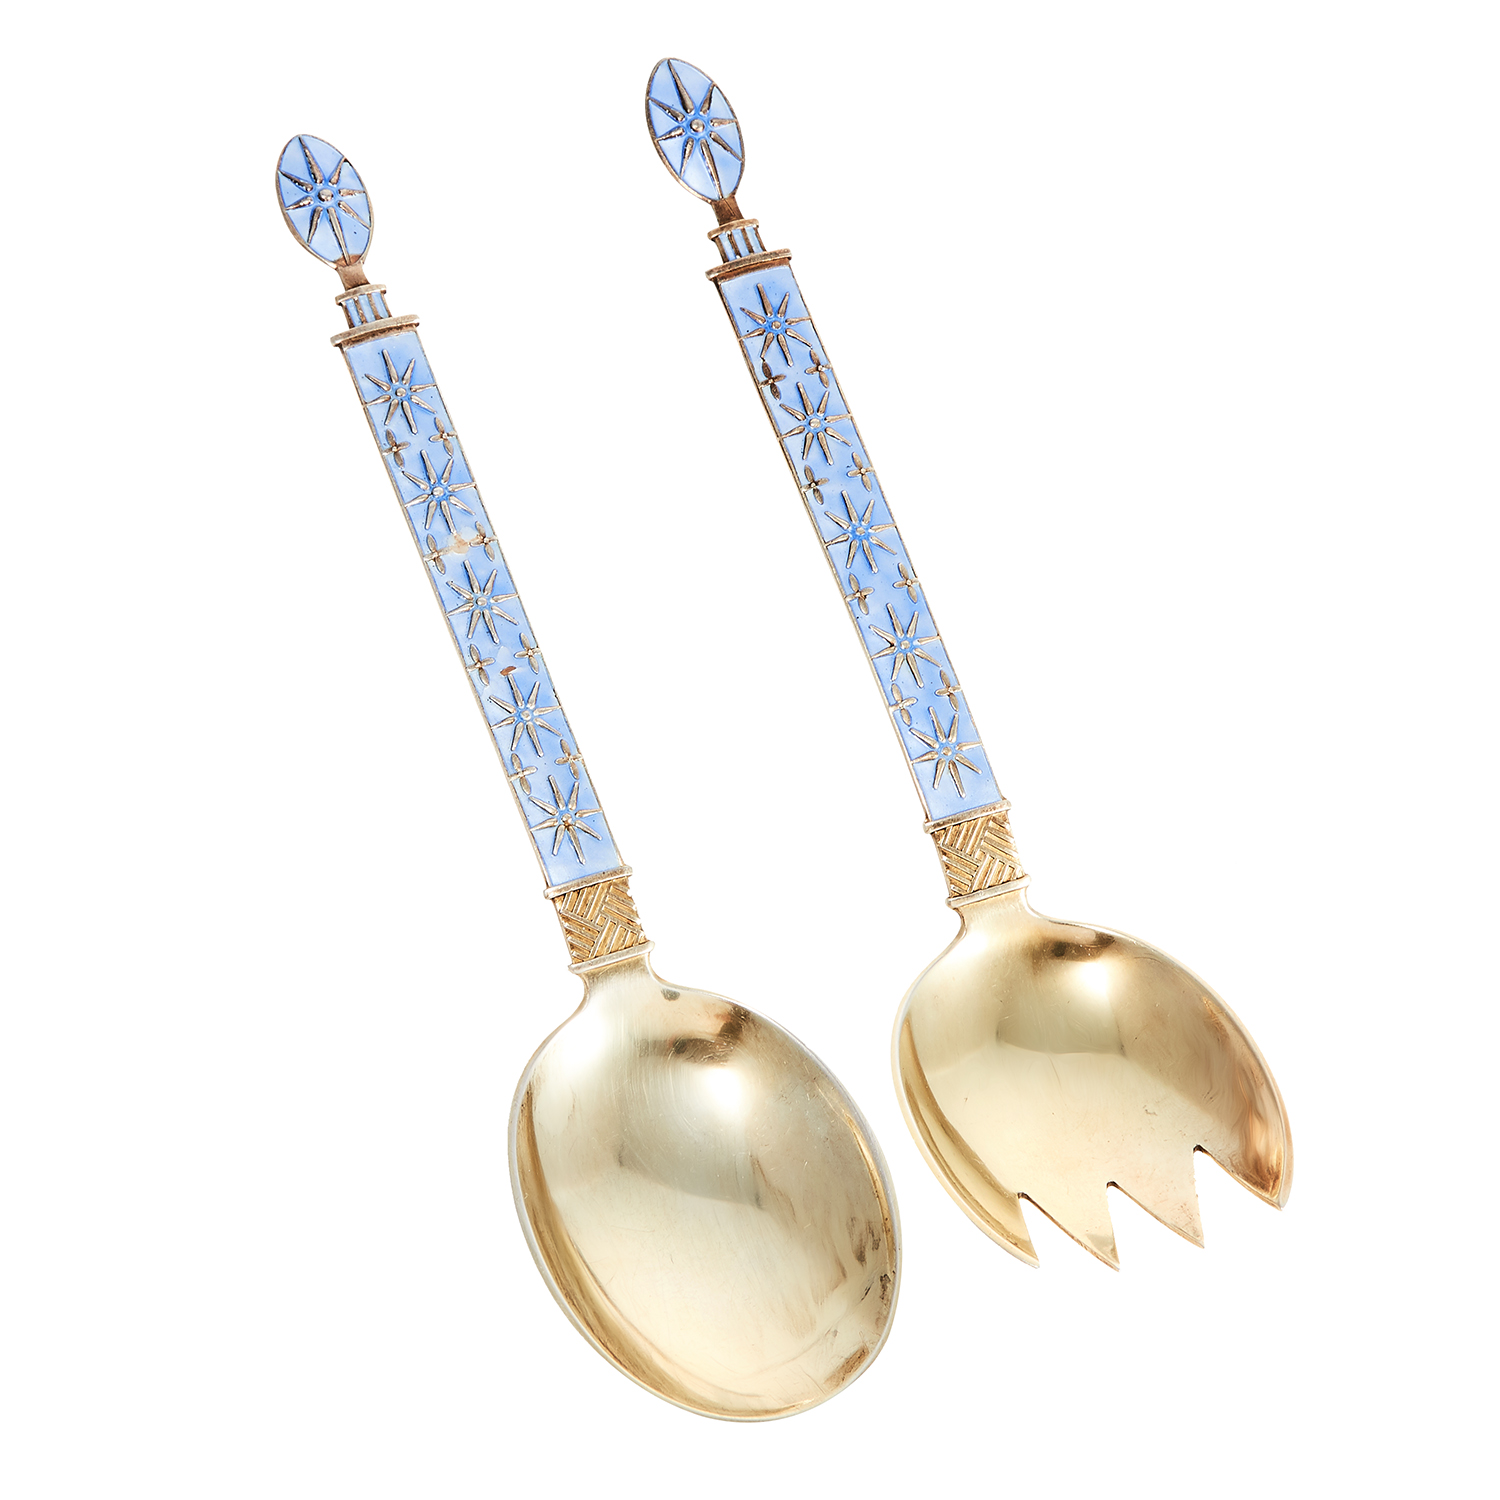 ANTIQUE ENAMELLED NORWEGIAN SILVER FORK AND SPOON SET, J TOSTRUP each handle decorated in blue